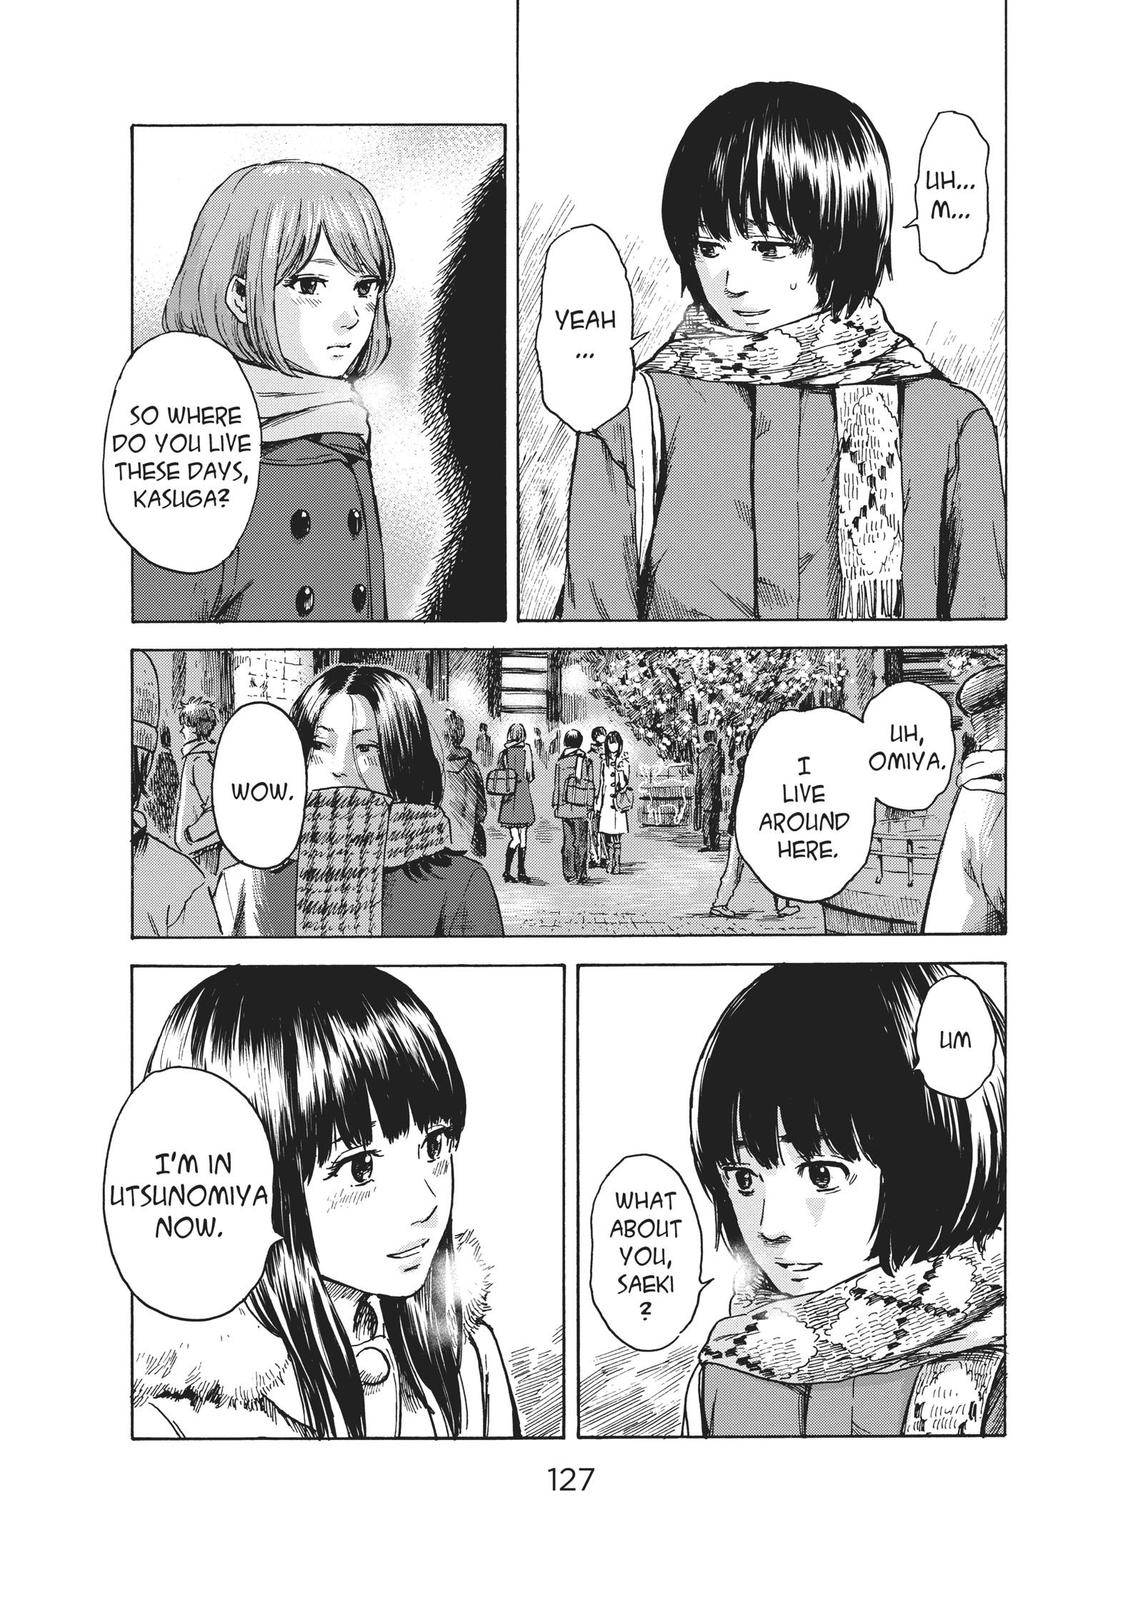 The official English release of The Flowers of Evil or Aku No Hana was  botched. And this isn't the only example. : r/manga